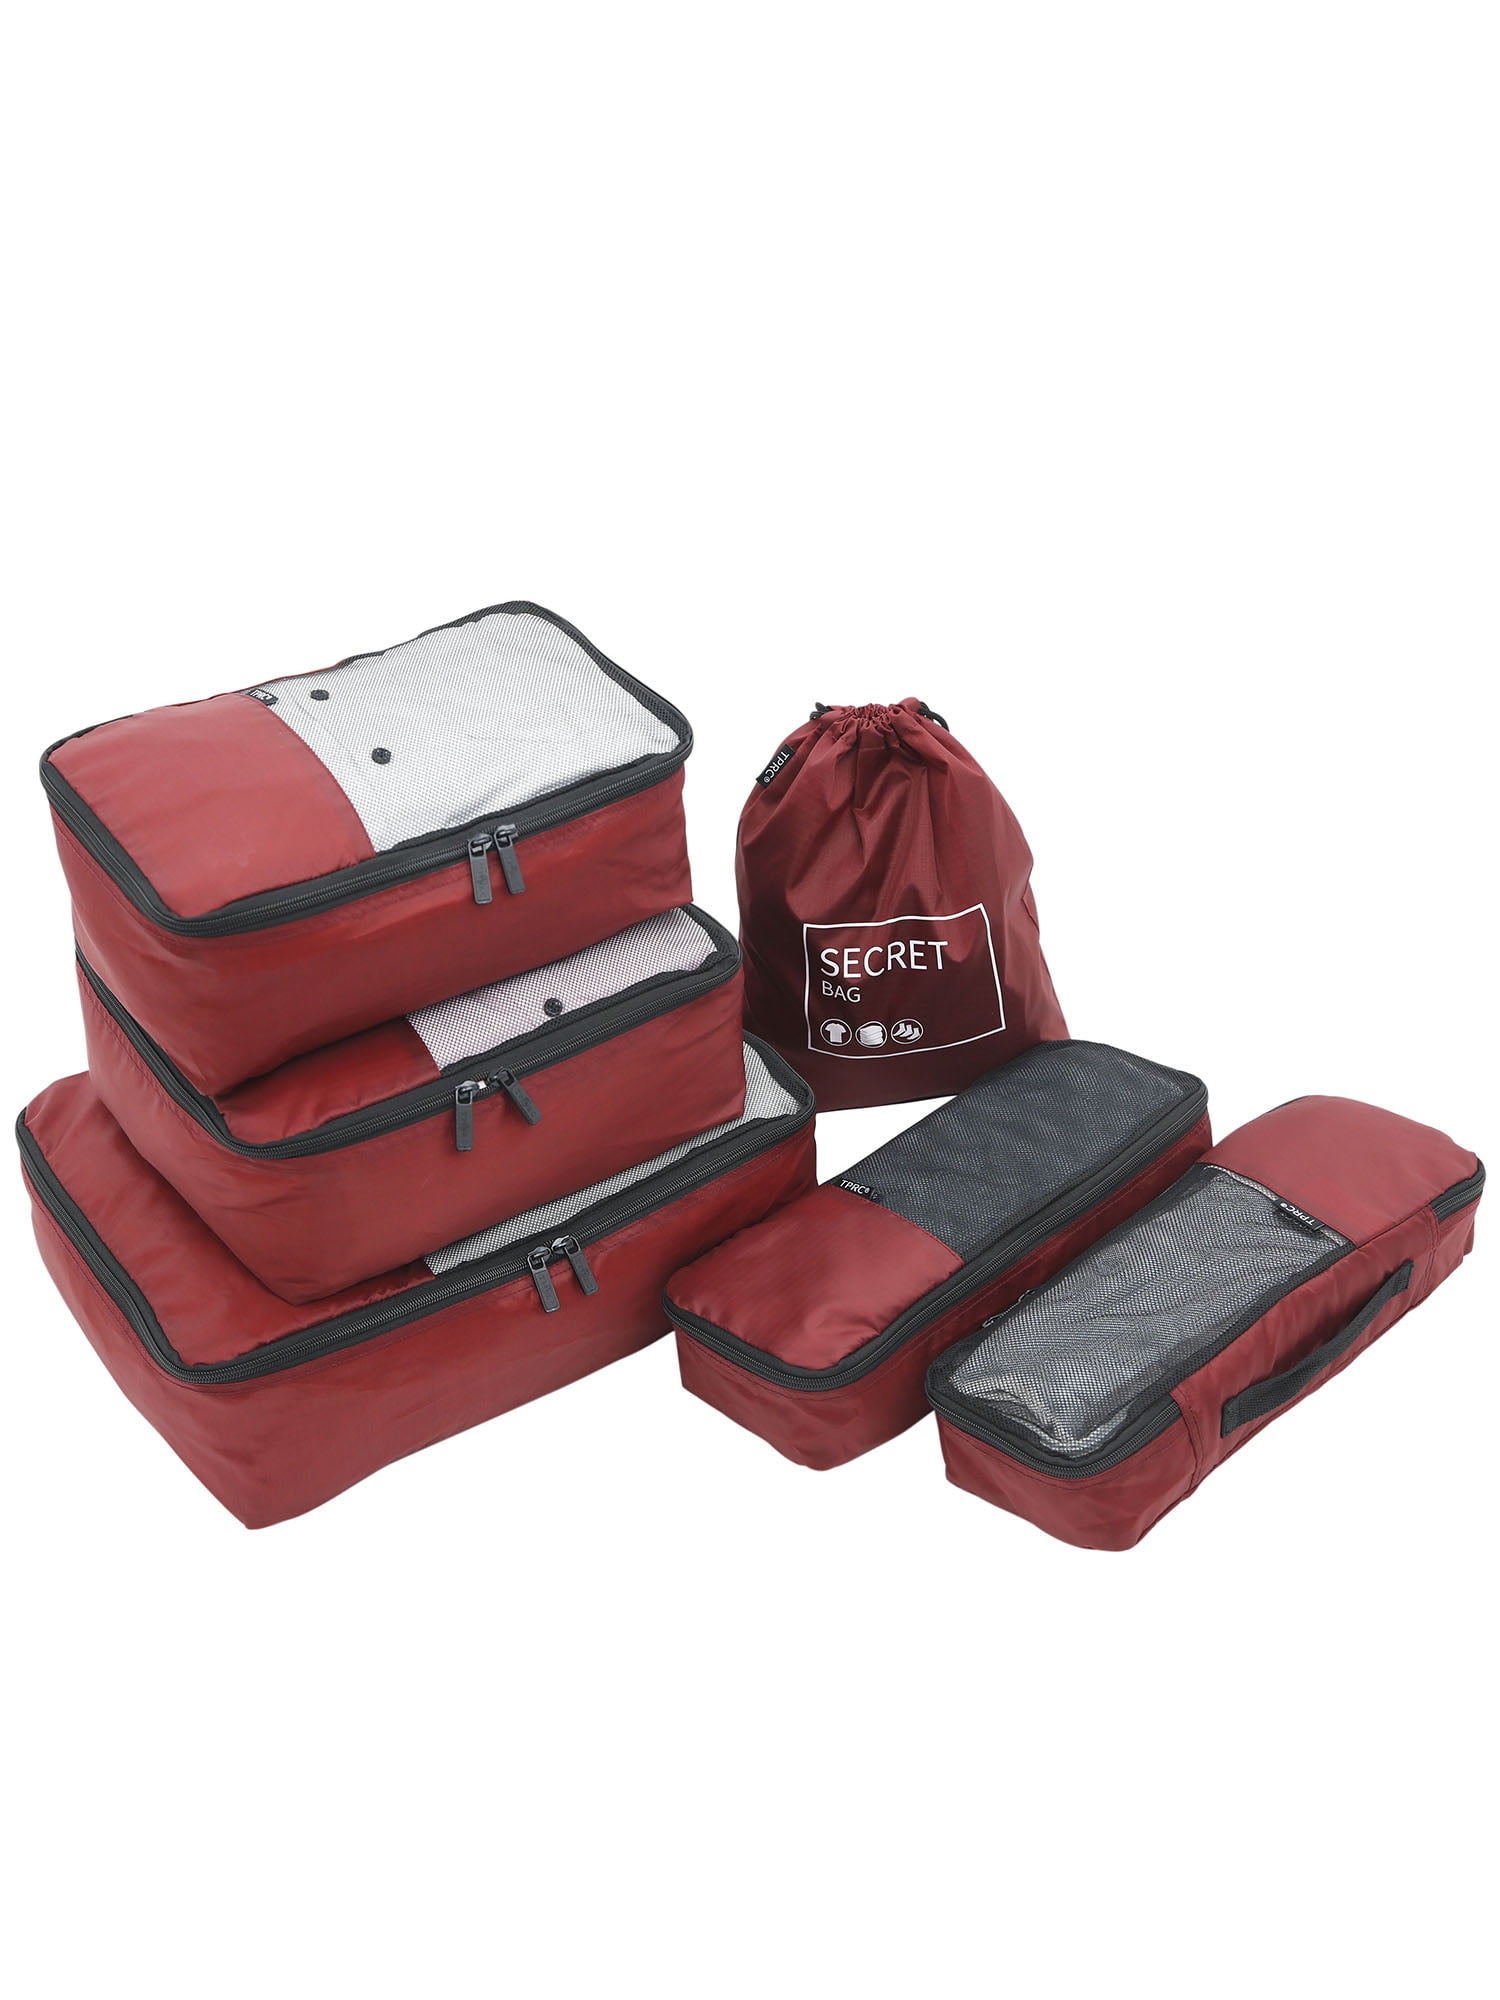 Perfect Travel Luggage Organizer HiDay 7 Set Travel Cube System 3 Packing Cubes 1 Premium Shoes Bag 3 Pouches